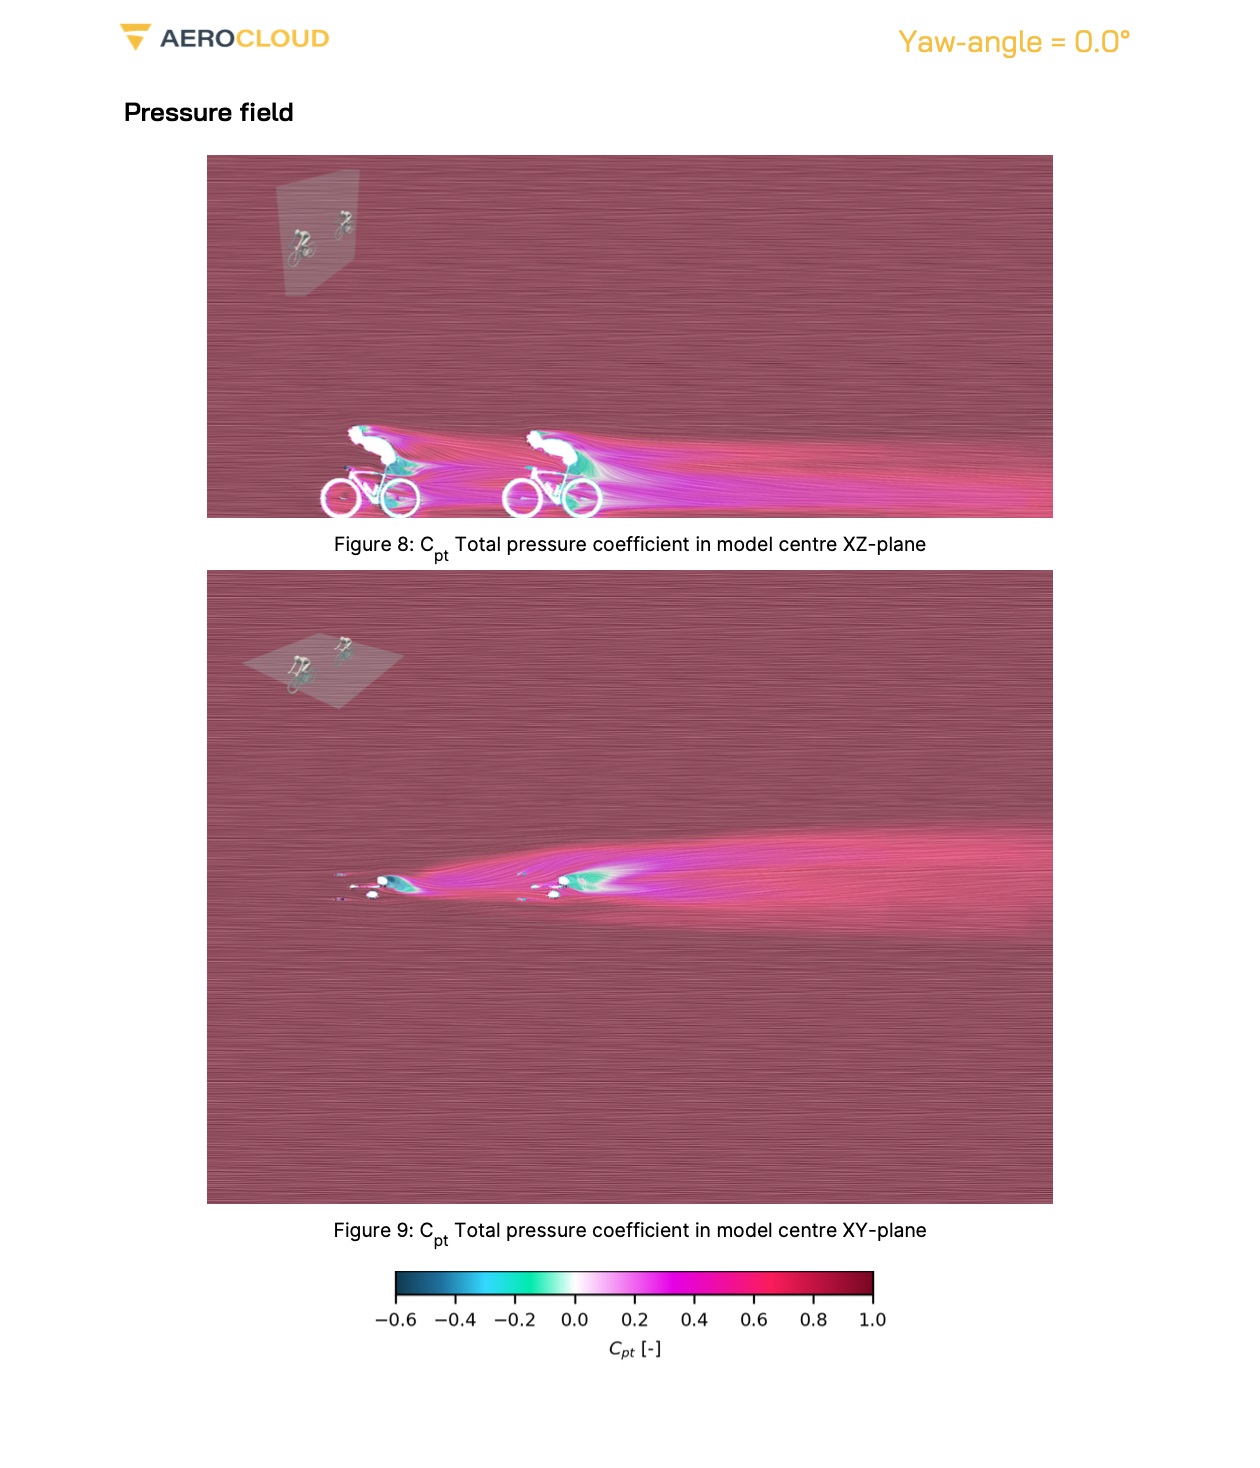 The image shows a CfD generated pressure field for two cyclists 